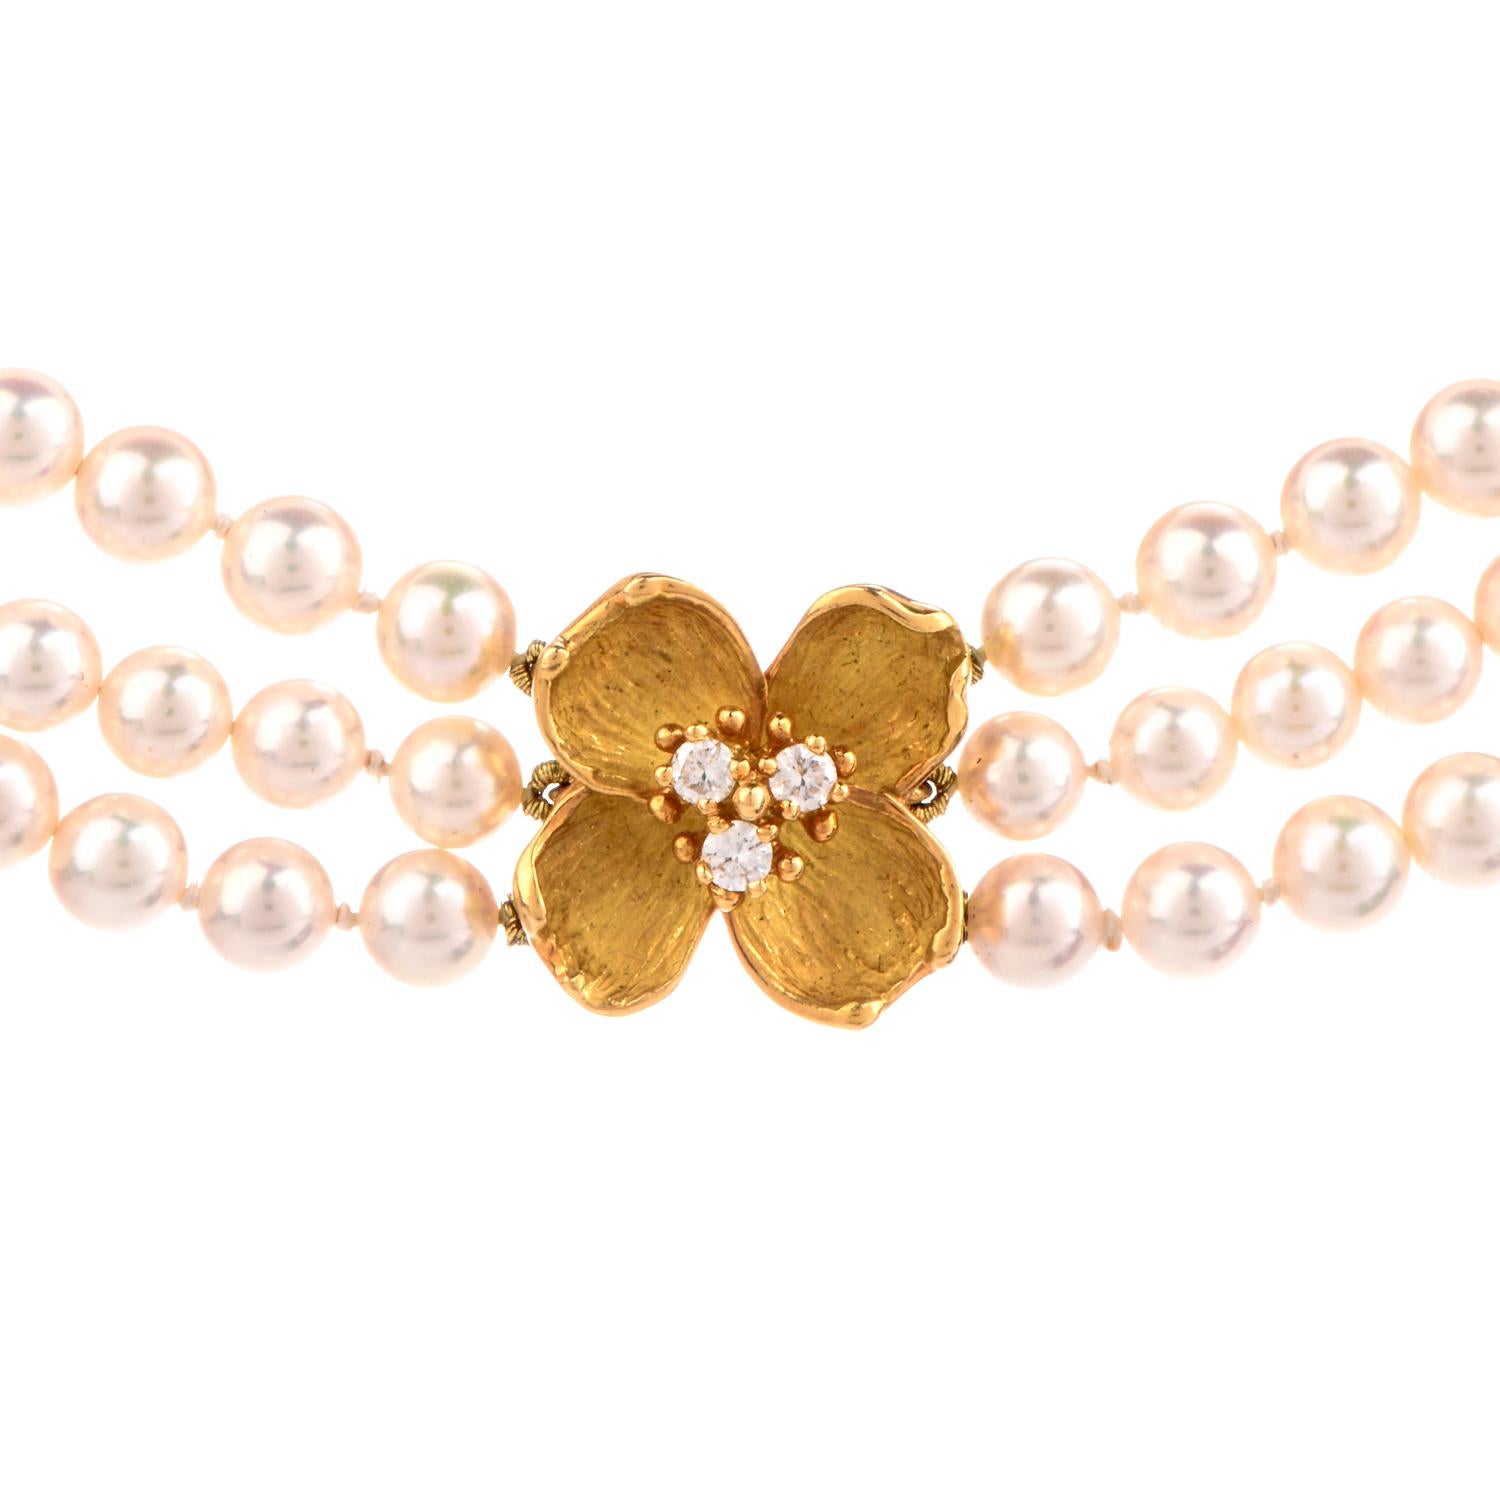 This stunning designer Tiffany & Co. necklace is crafted with 18-karat yellow gold, weighing 56.8 grams and measuring 16” long x 15mm wide. Composed of three strands of high lustrous Akoya Jappanies pearls, measuring 4.5mm- 5mm in diameter.